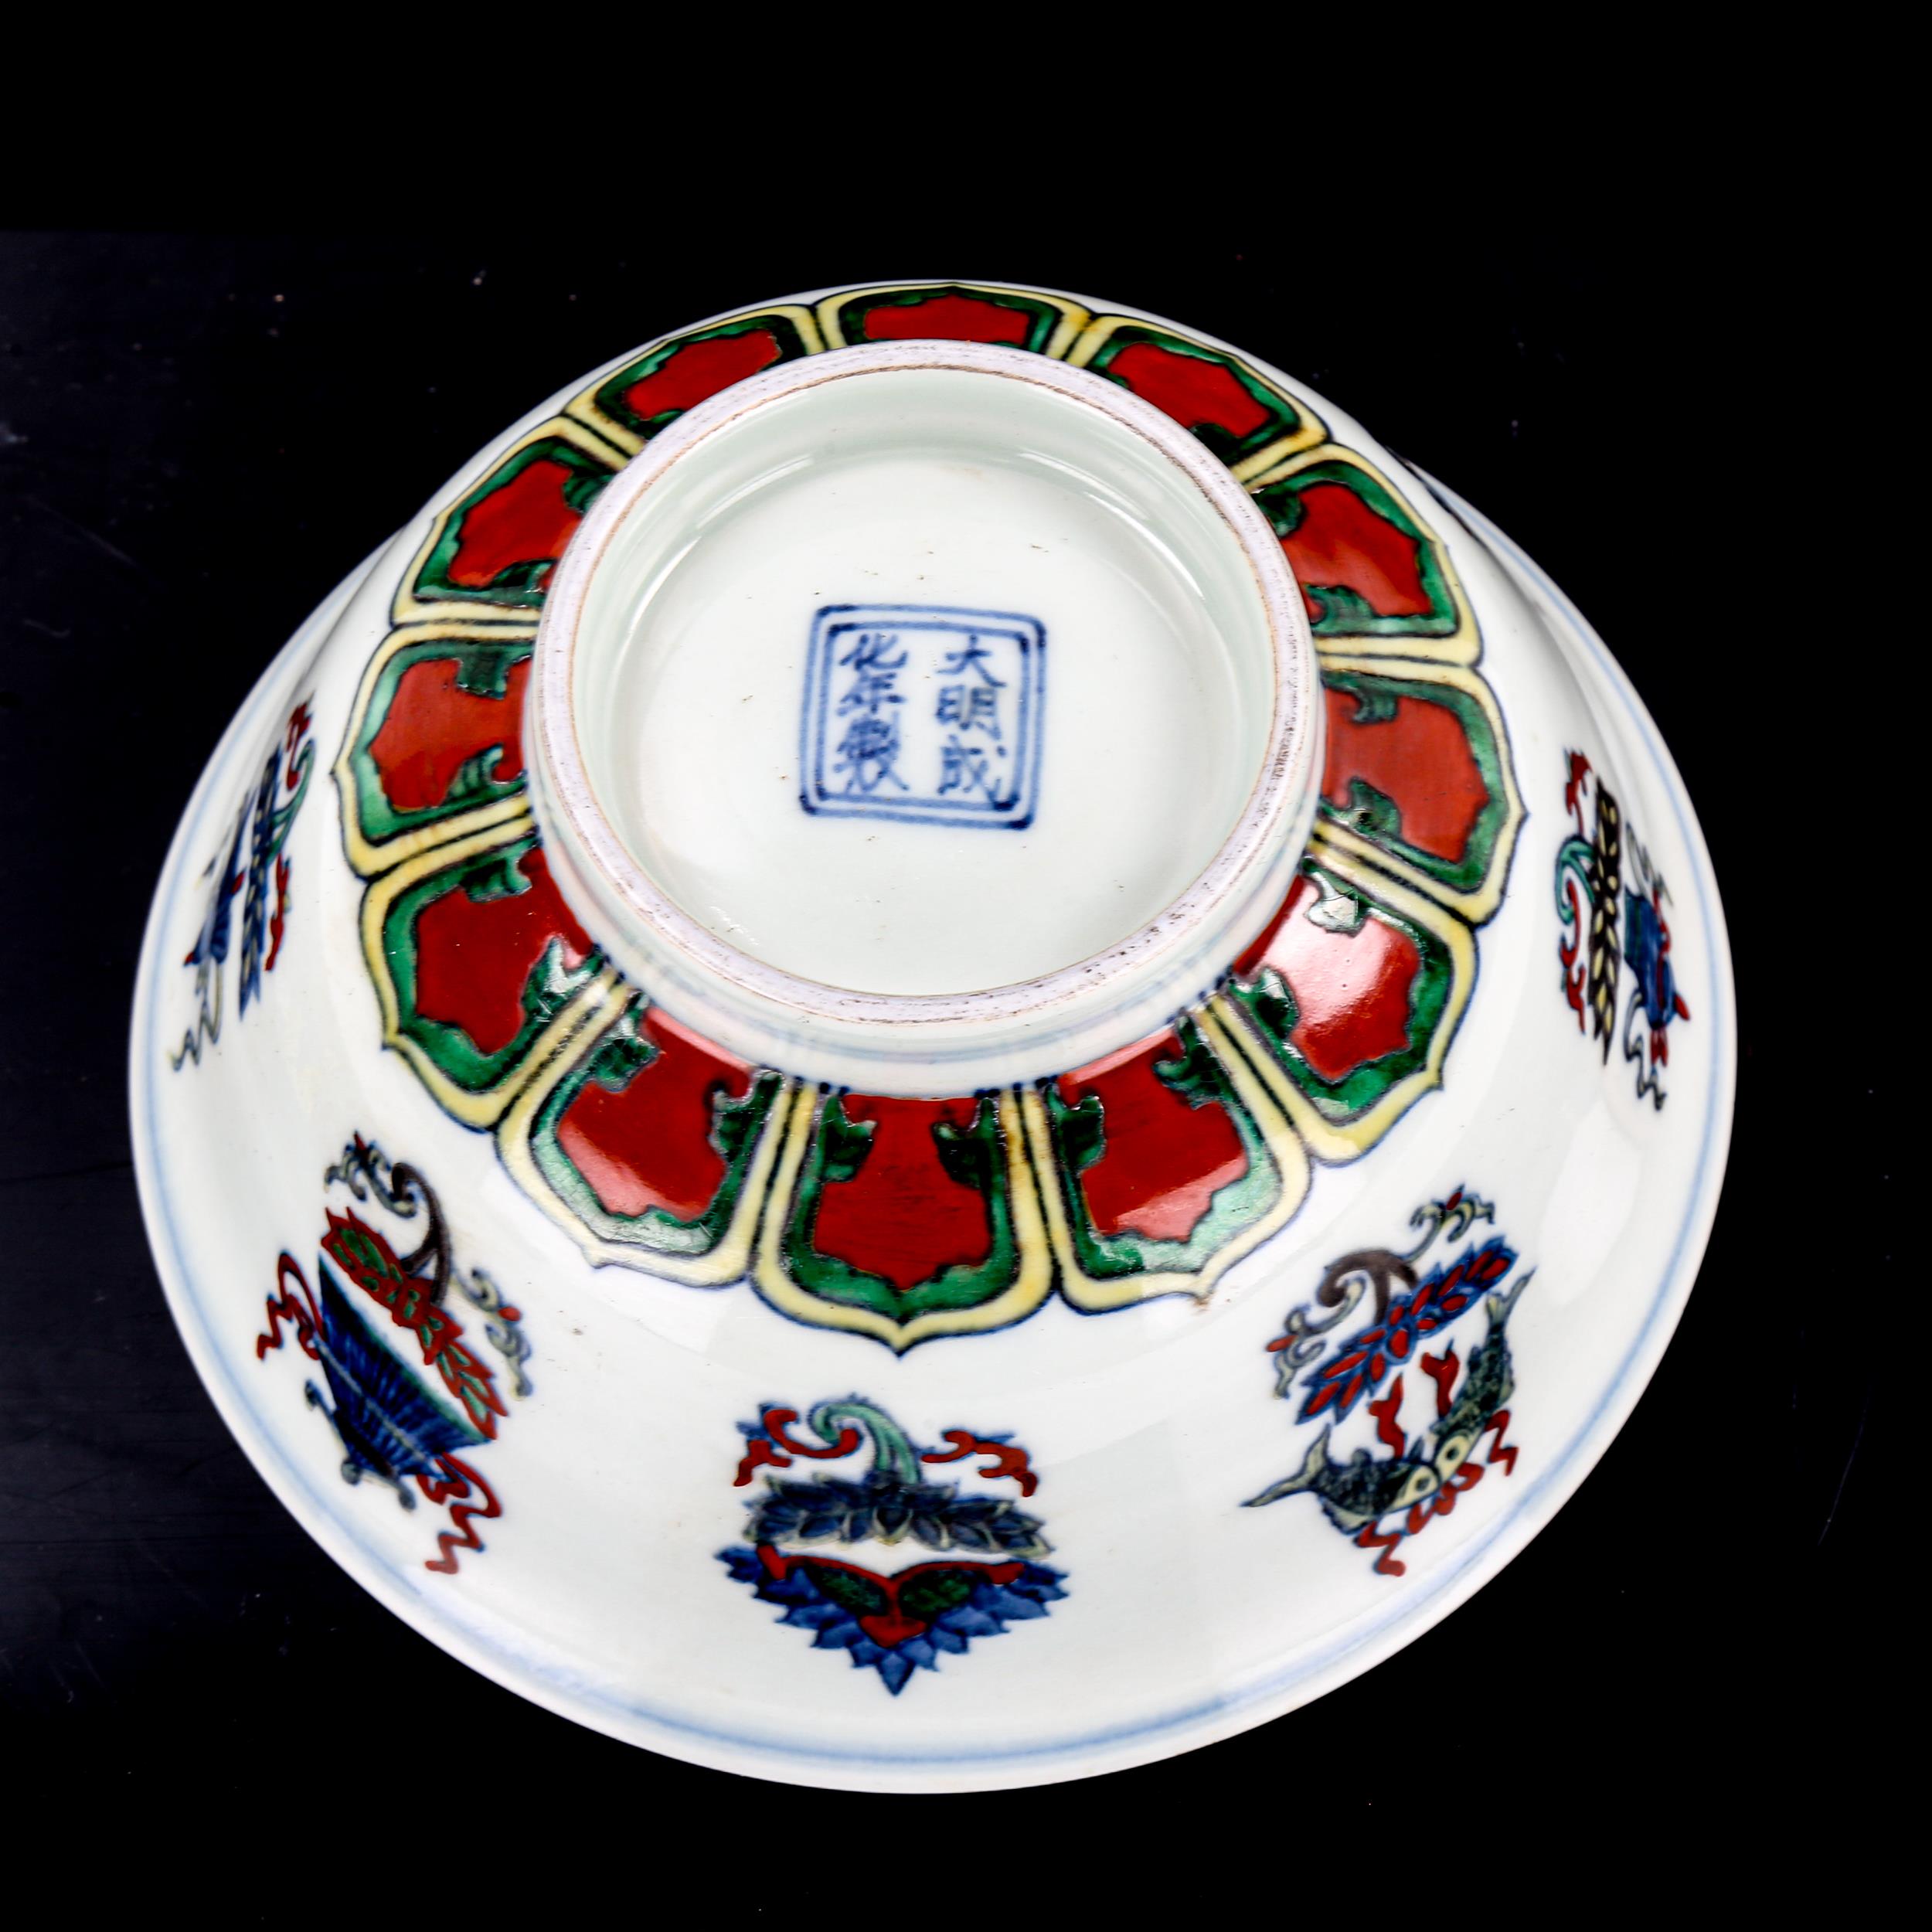 A Chinese porcelain Doucai bowl, 6 character mark, diameter 17.5cm - Image 3 of 3